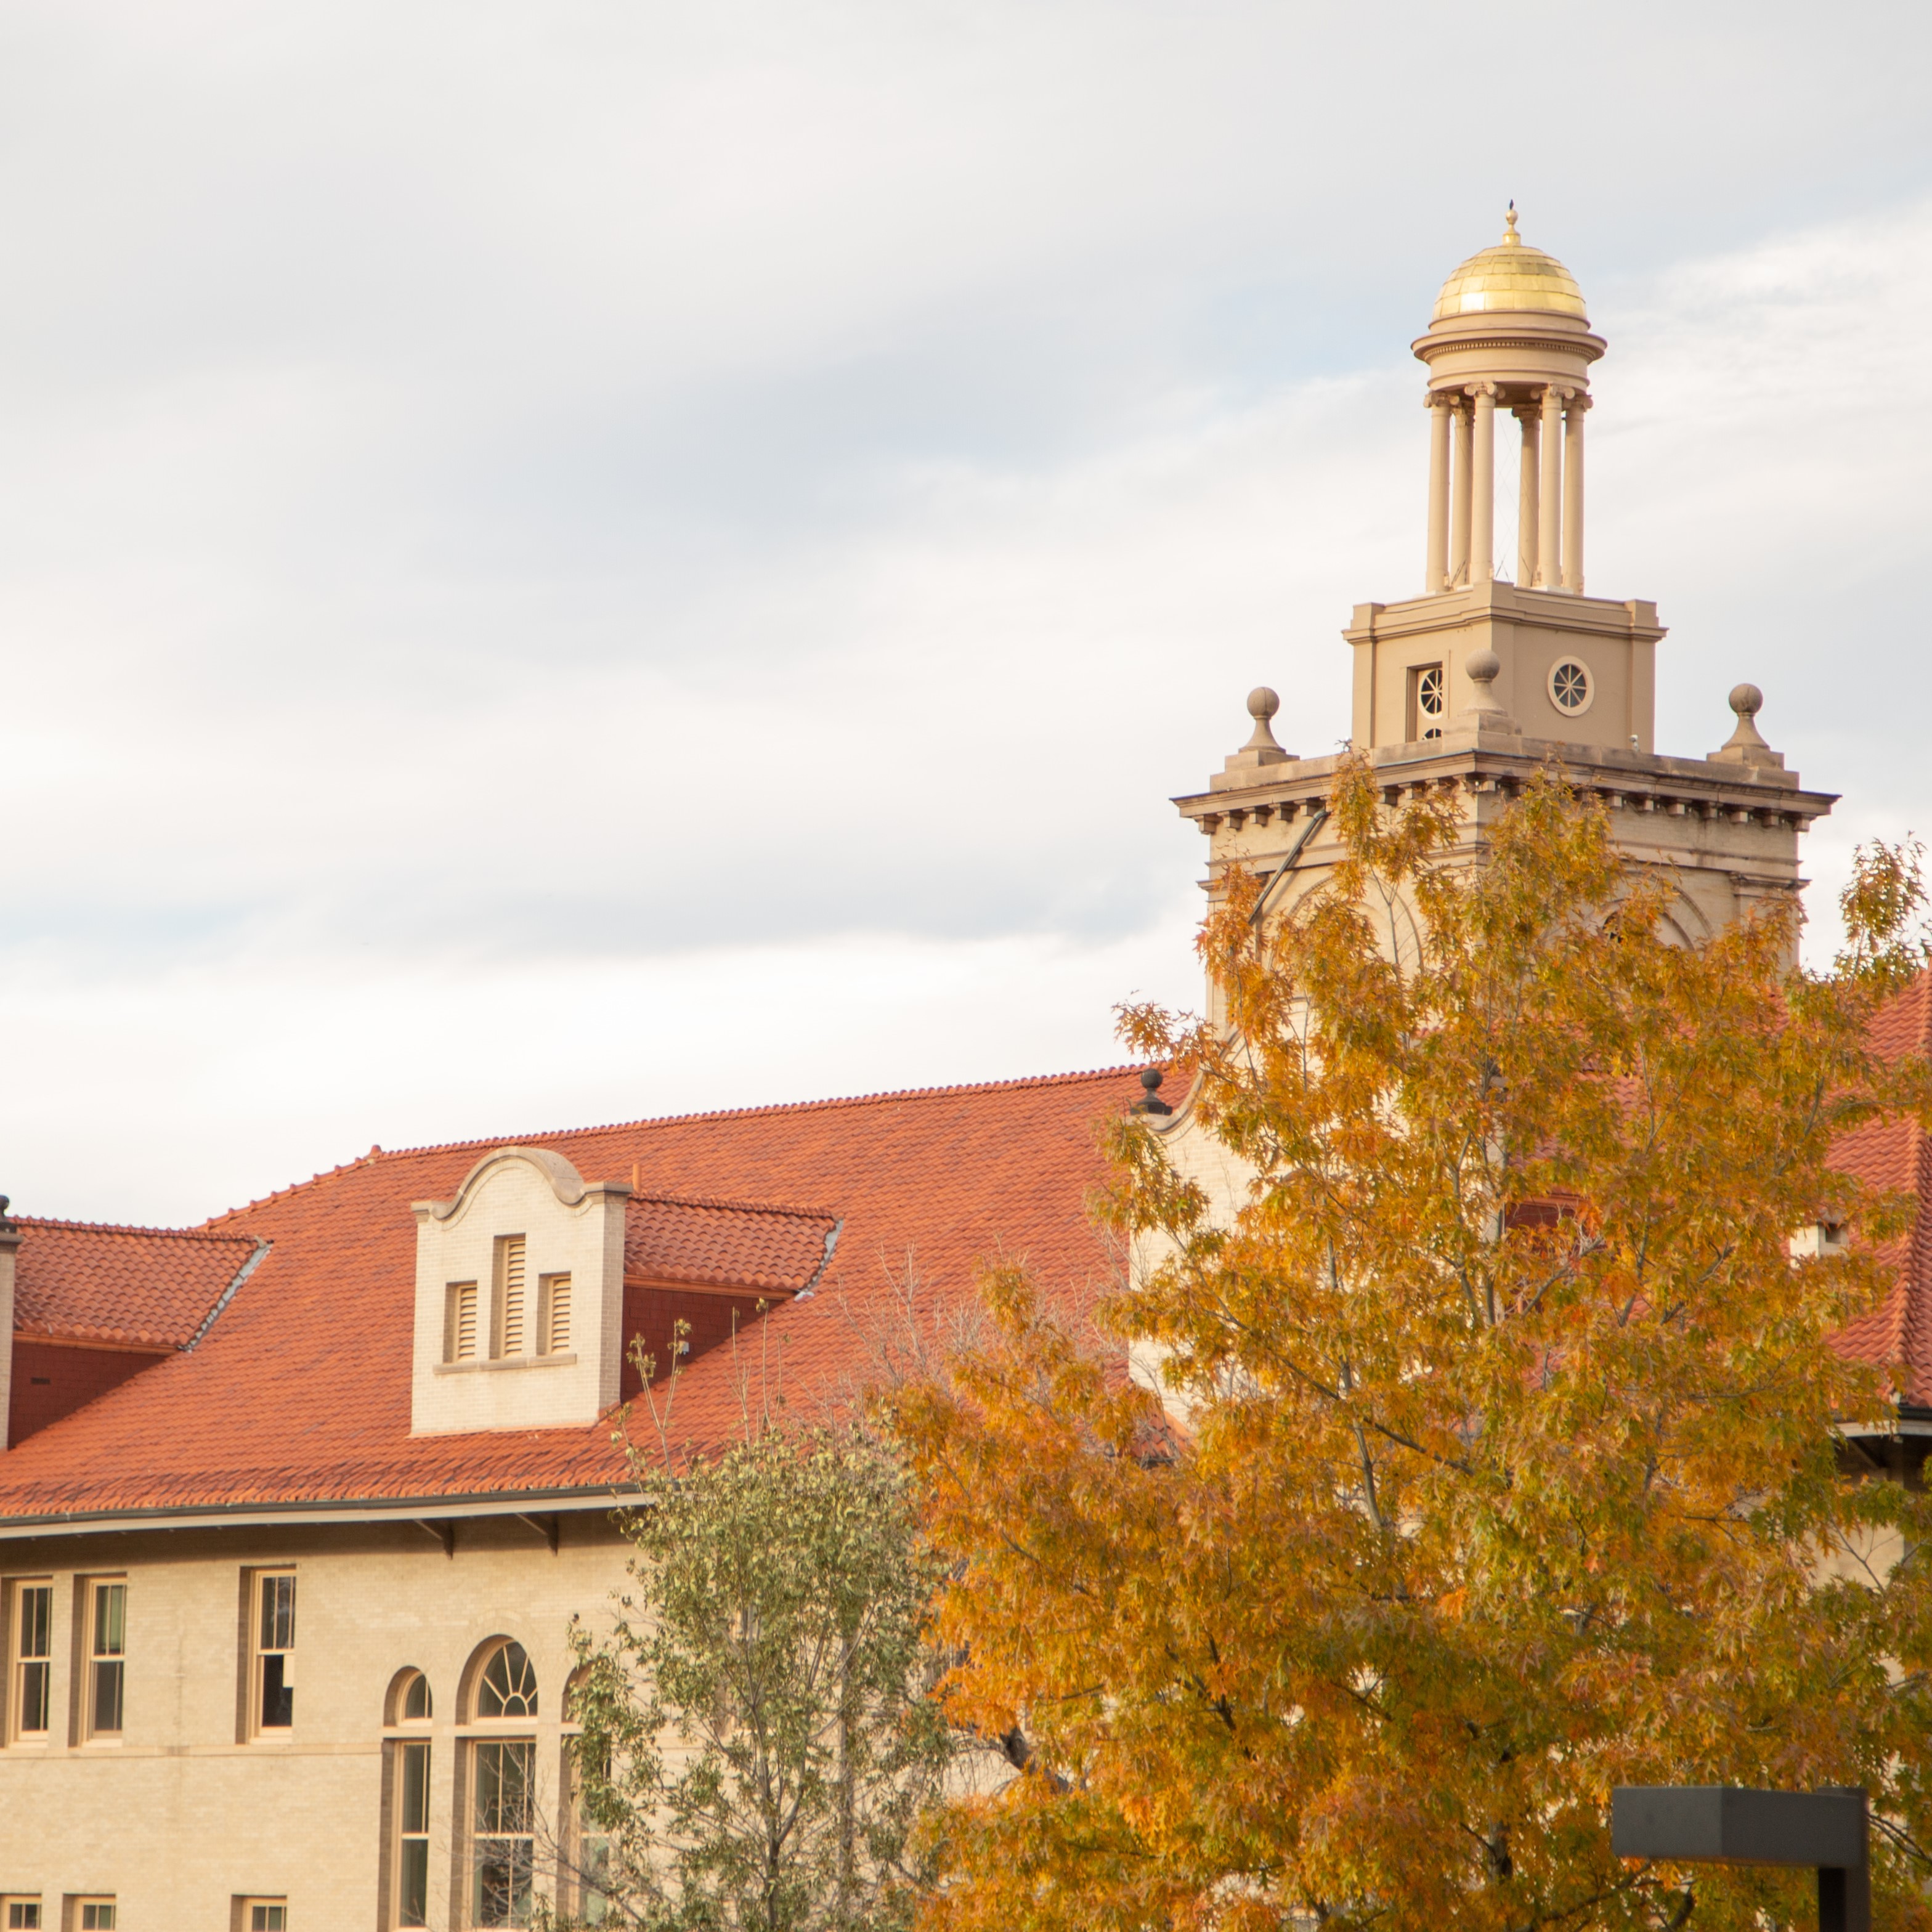 School of Mines in the Fall